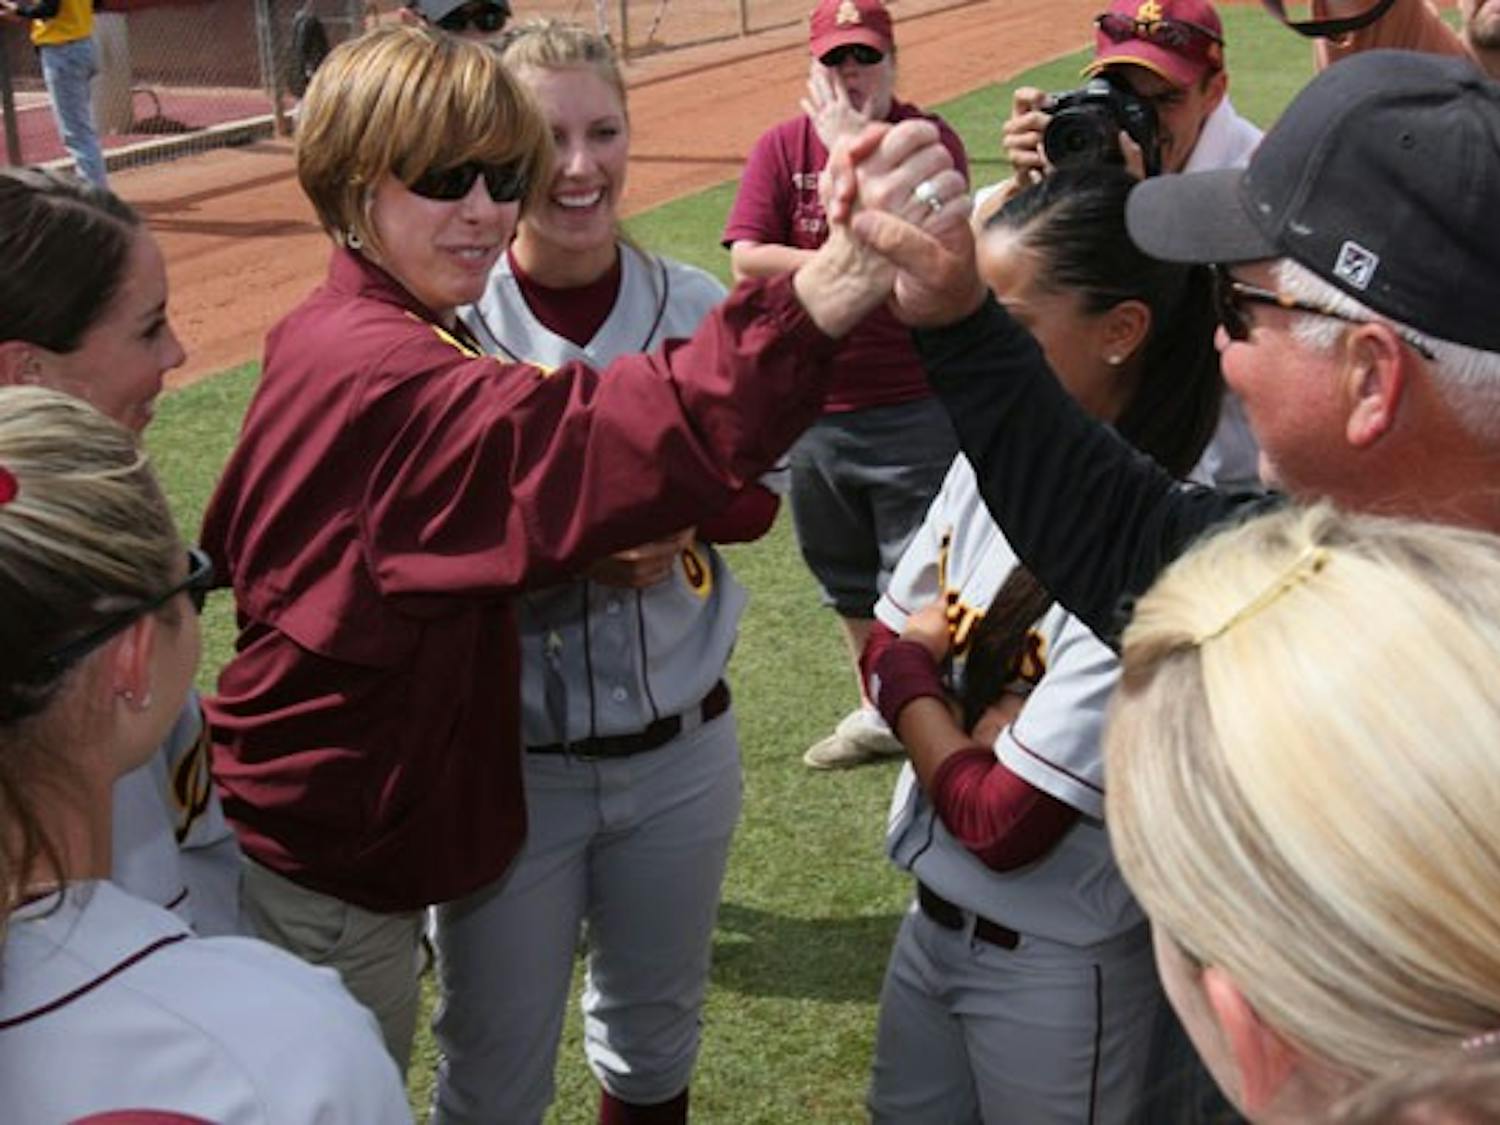 Jeffrey Lowman/The State PressSUPPORT FROM THE HIGHER-UPS: ASU athletic director Lisa Love high-fives ASU softball head coach Clint Meyers after the 9-0 victory over the Northwestern Wildcats that May 24th at Farrington Stadium that sent ASU to the Softball World Series in Oklahoma City.